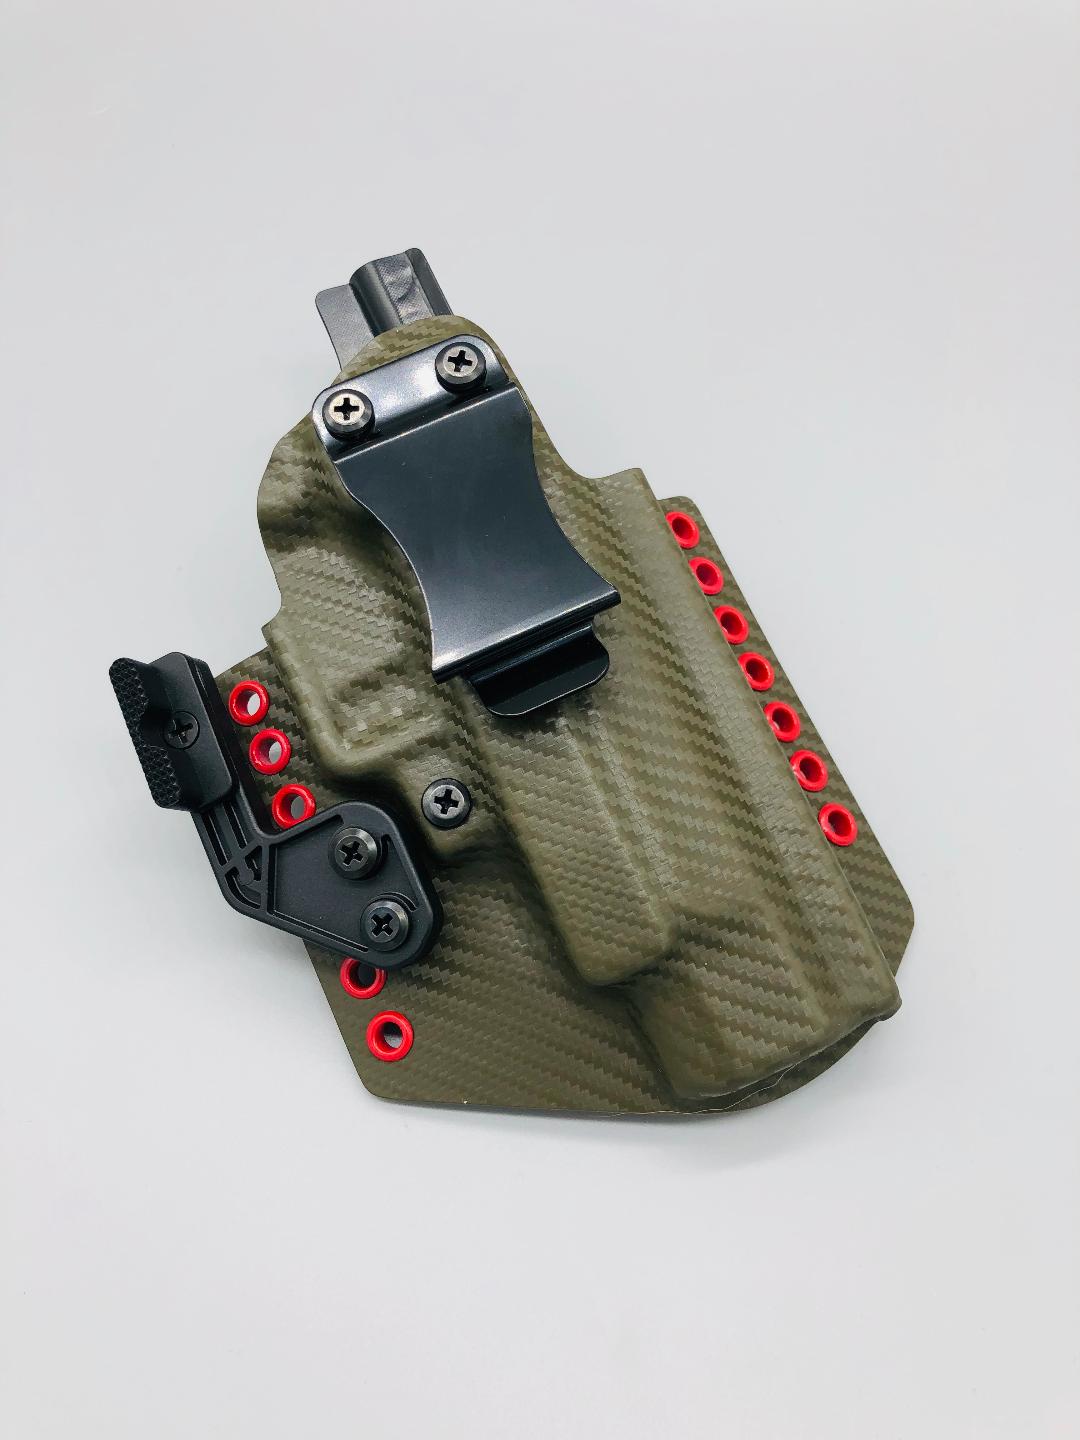 Proteus Series w/ Mod Wing Veteran Made USA Neptune Concealment IWB Kydex Holster for M&P 4 M2.0 Compact 9mm 